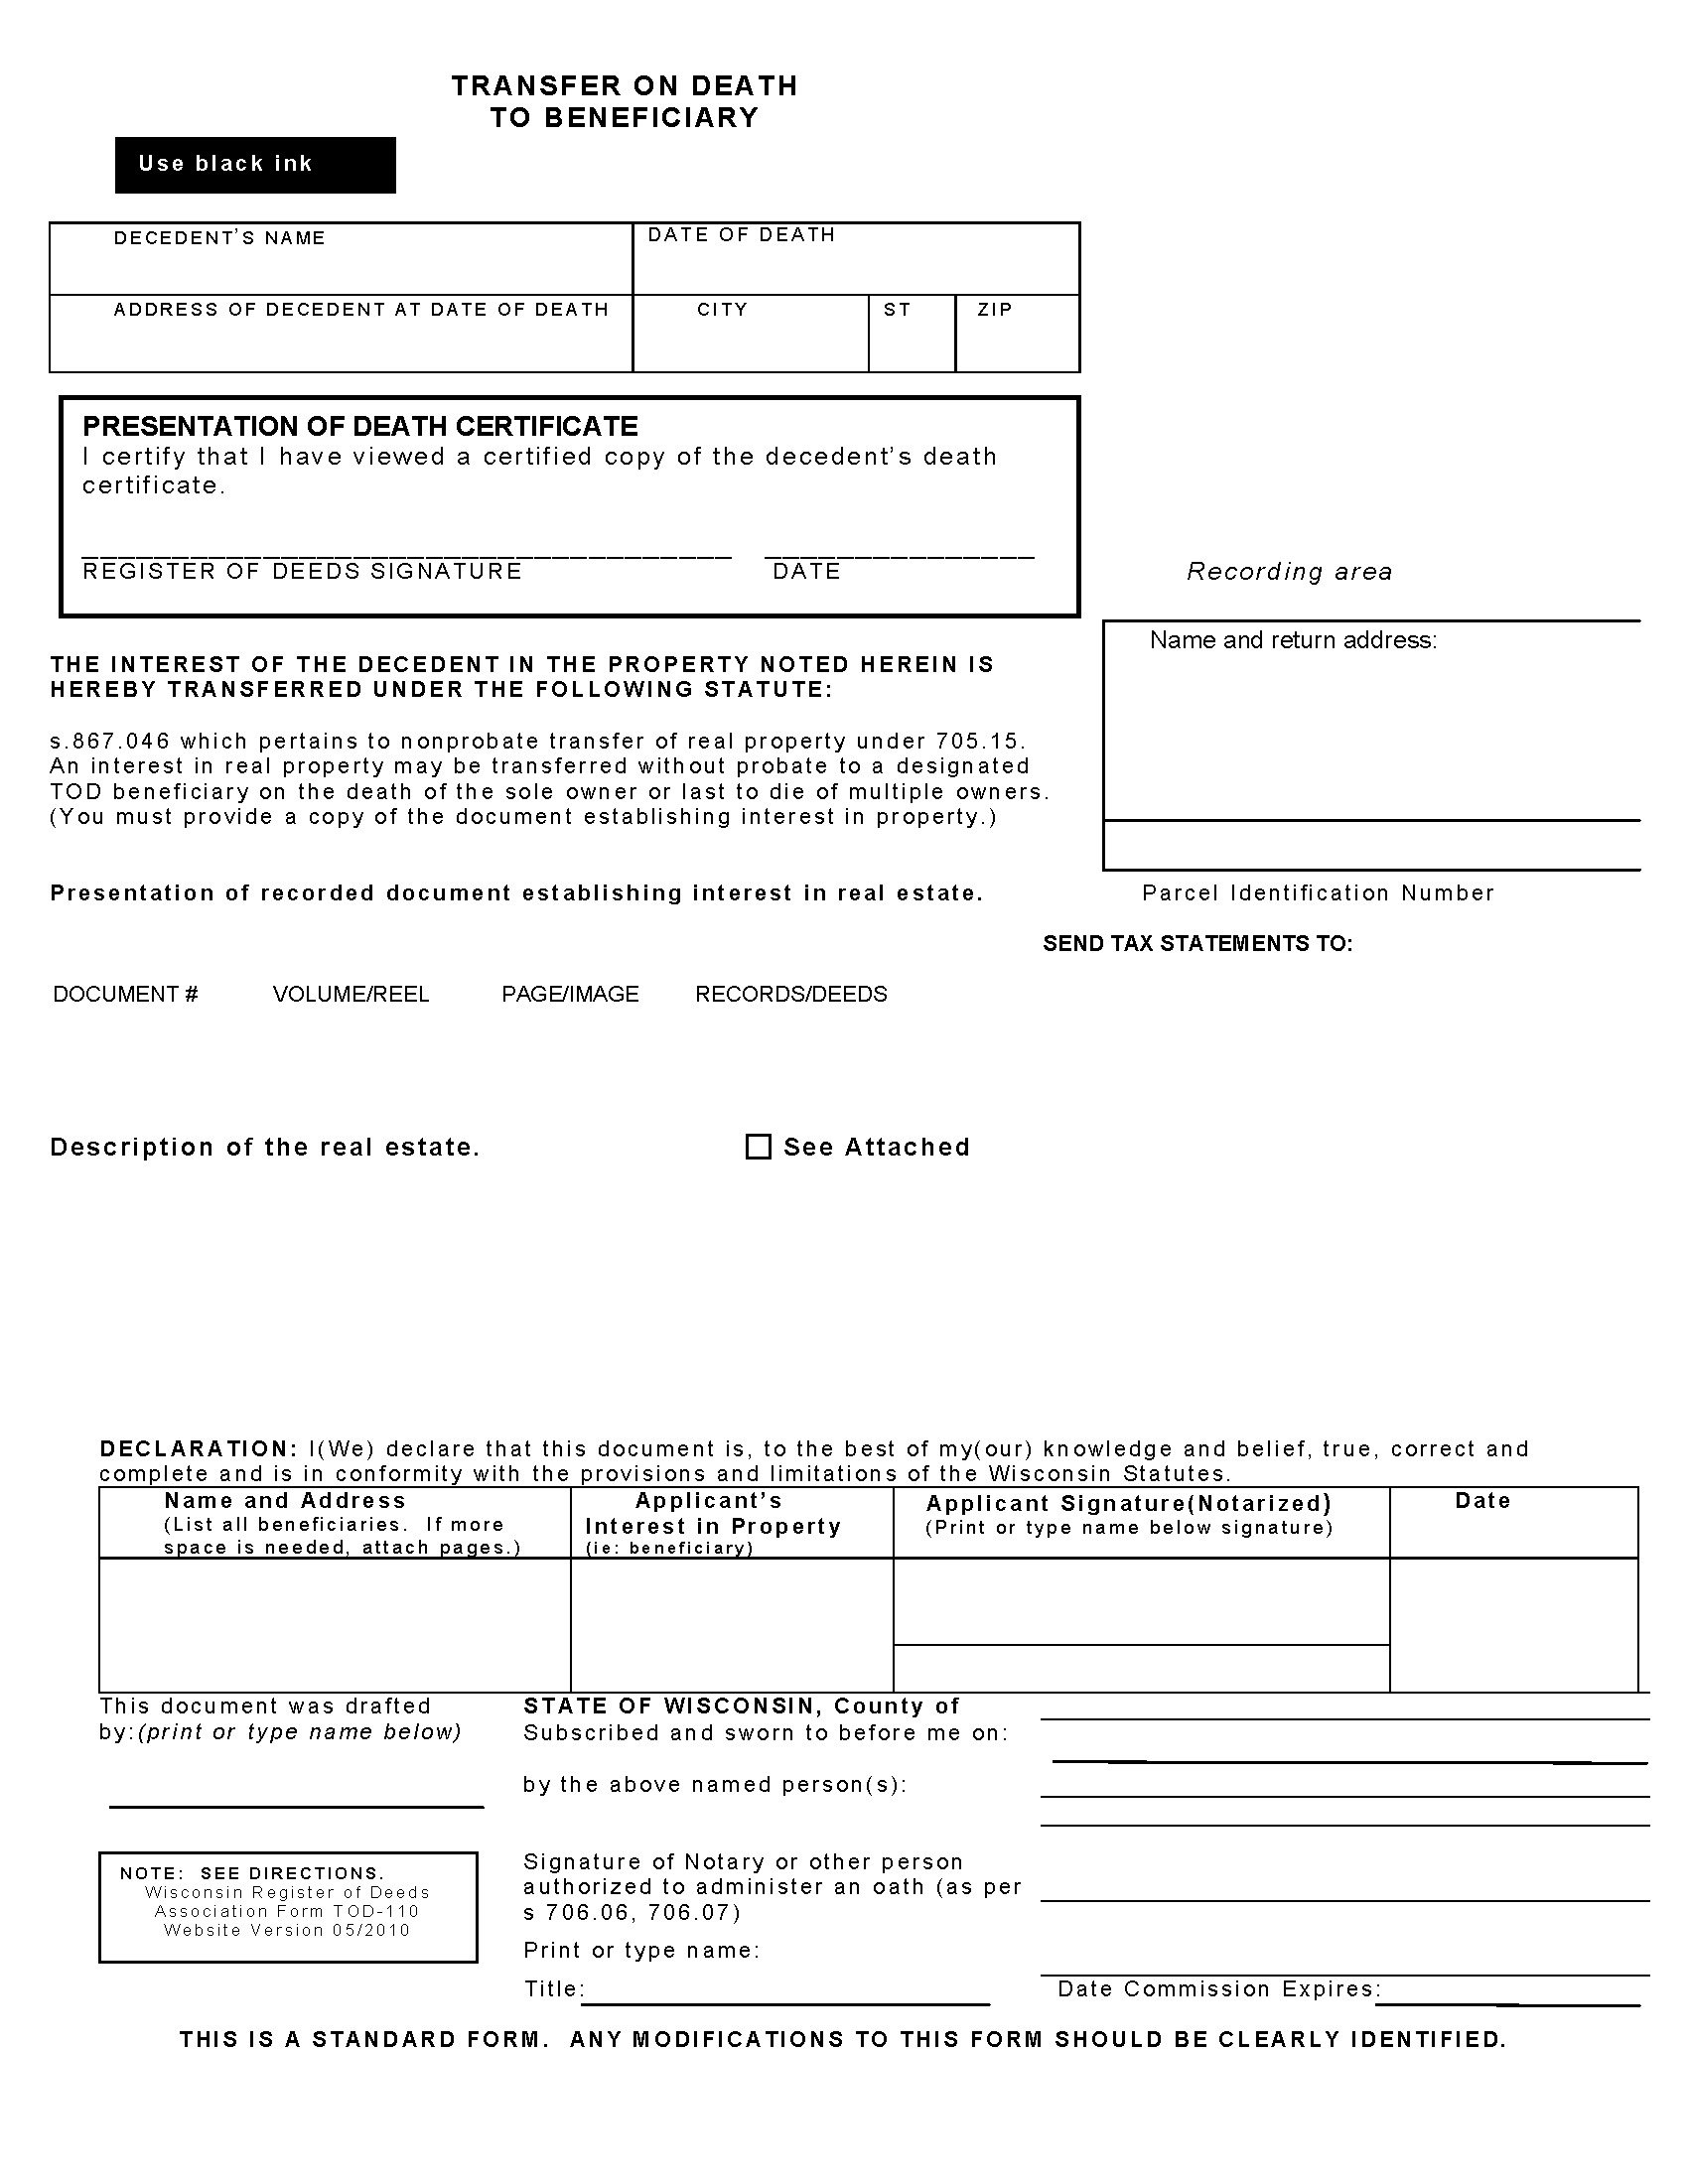 Transfer on Death to Beneficiary